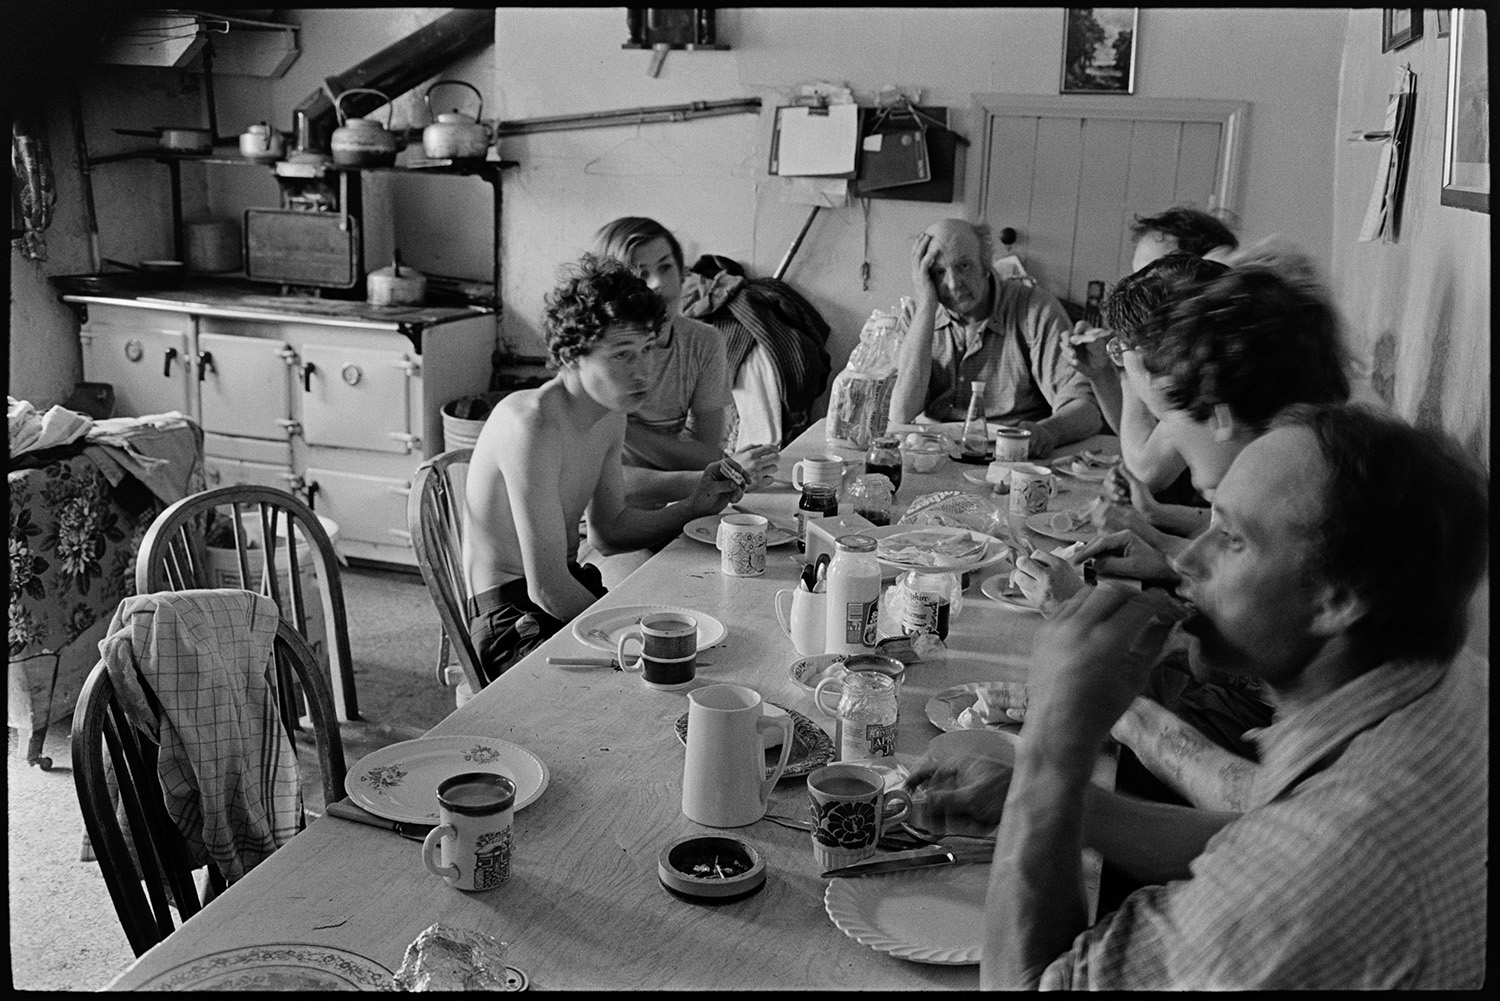 The French family sat having tea in their kitchen at Brendon Barton. A Rayburn stove can be seen in the background.